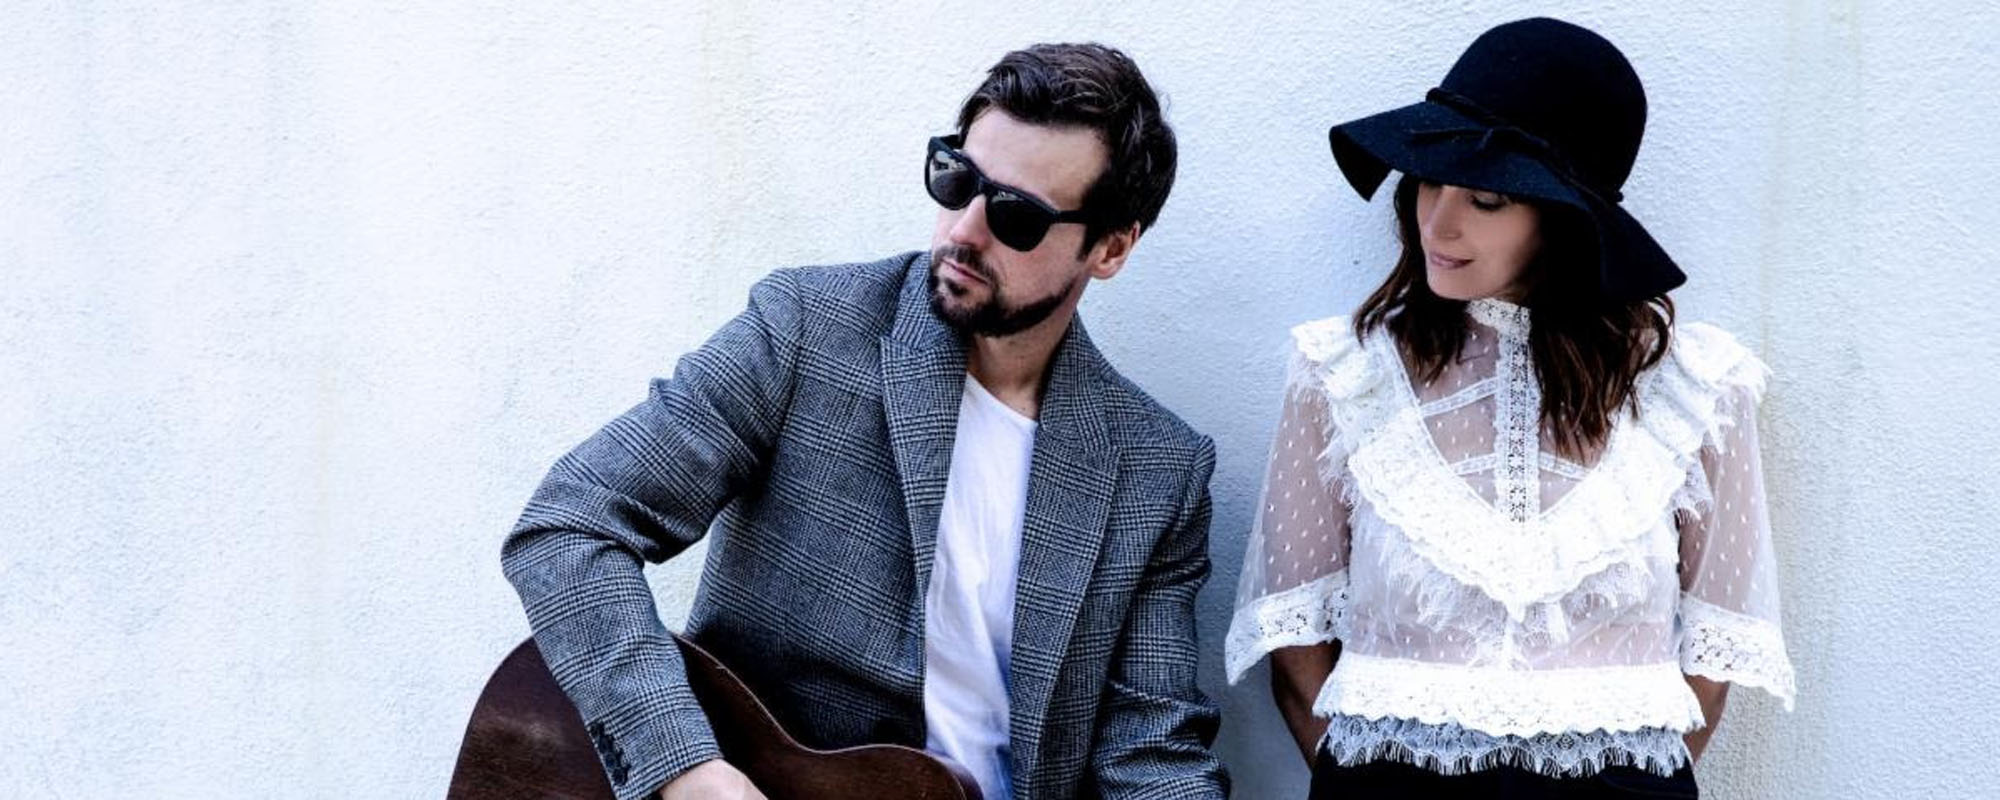 Songwriting Spouses Raine Maida And Chantal Kreviazuk Dig Deep Into The Heart Of Marriage On New Album And Documentary